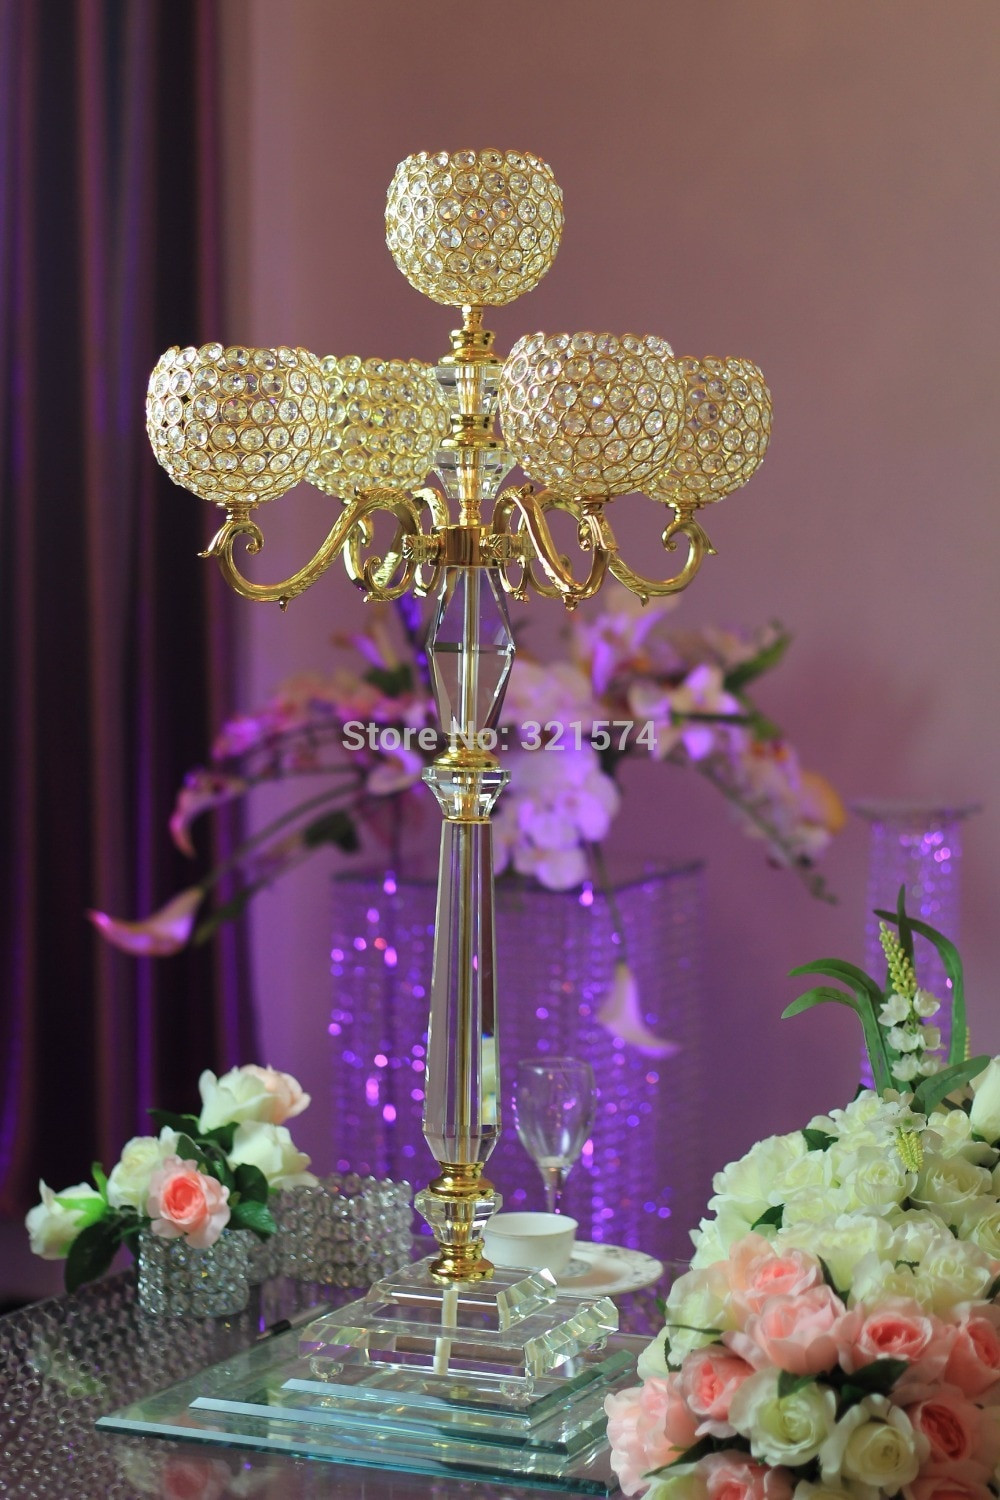 30 Stylish Bling Vases for Sale 2024 free download bling vases for sale of wedding crystal globe centerpieces 5arm 47 24inch tall metal gold inside wedding crystal globe centerpieces 5arm 47 24inch tall metal gold crystal candelabras candle 